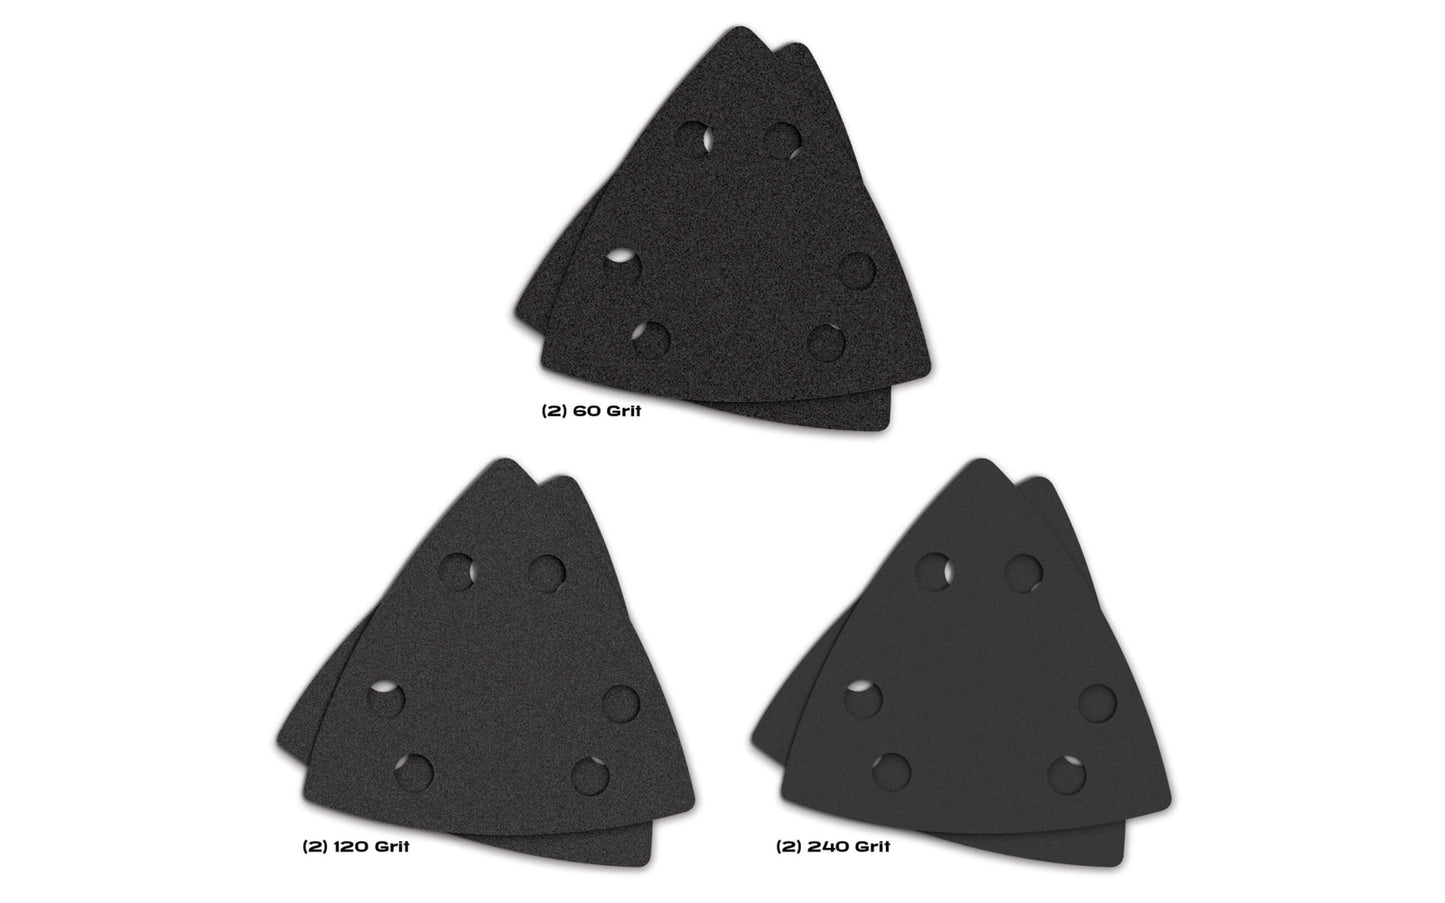 Sandpaper variety pack by Imperial Blades includes the three grit options for sanding projects: 60 Coarse Grit, 120 Medium Grit & 240 Fine Grit. Sandpaper includes holes to allow for dust collection. Compatible with 3-1/2″ oscillating multi-tool triangle sanding pad attachments. 819846017970. Model No. IBOTSPHV-6